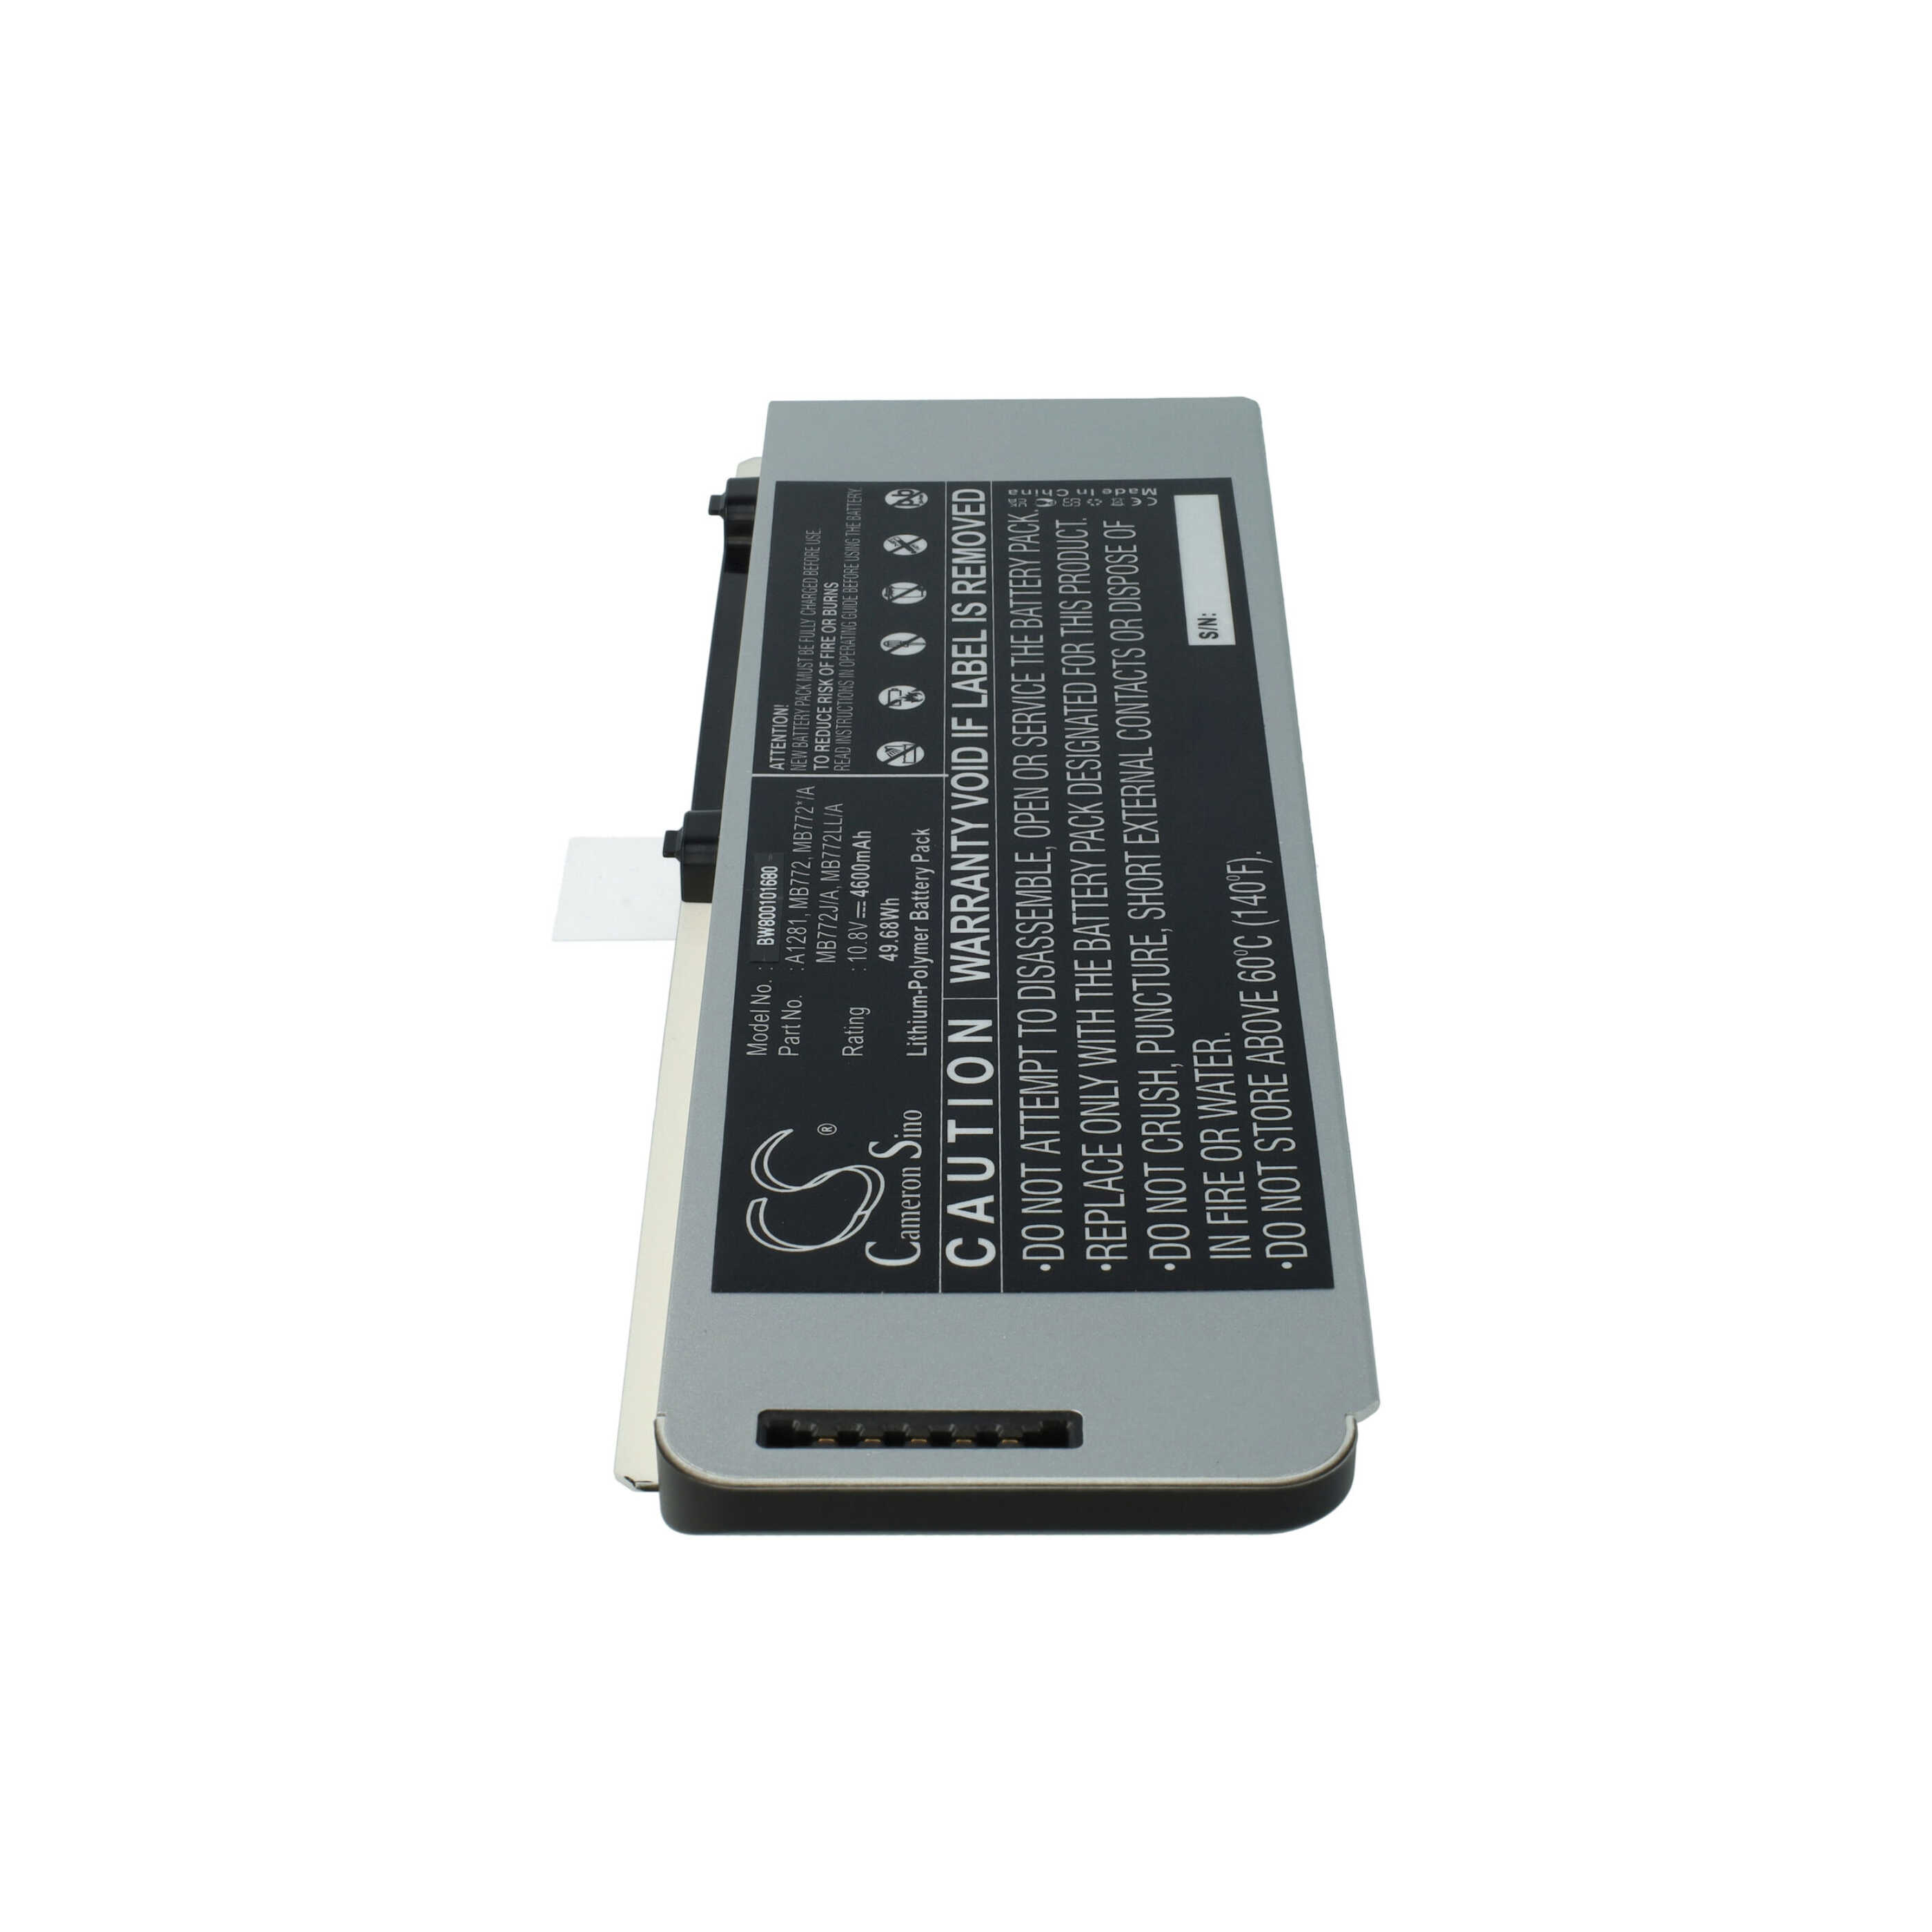 Notebook Battery Replacement for Apple MB772J/A, MB772*/A, MB772, A1286, A1281 - 4400mAh 10.8V Li-Ion, silver